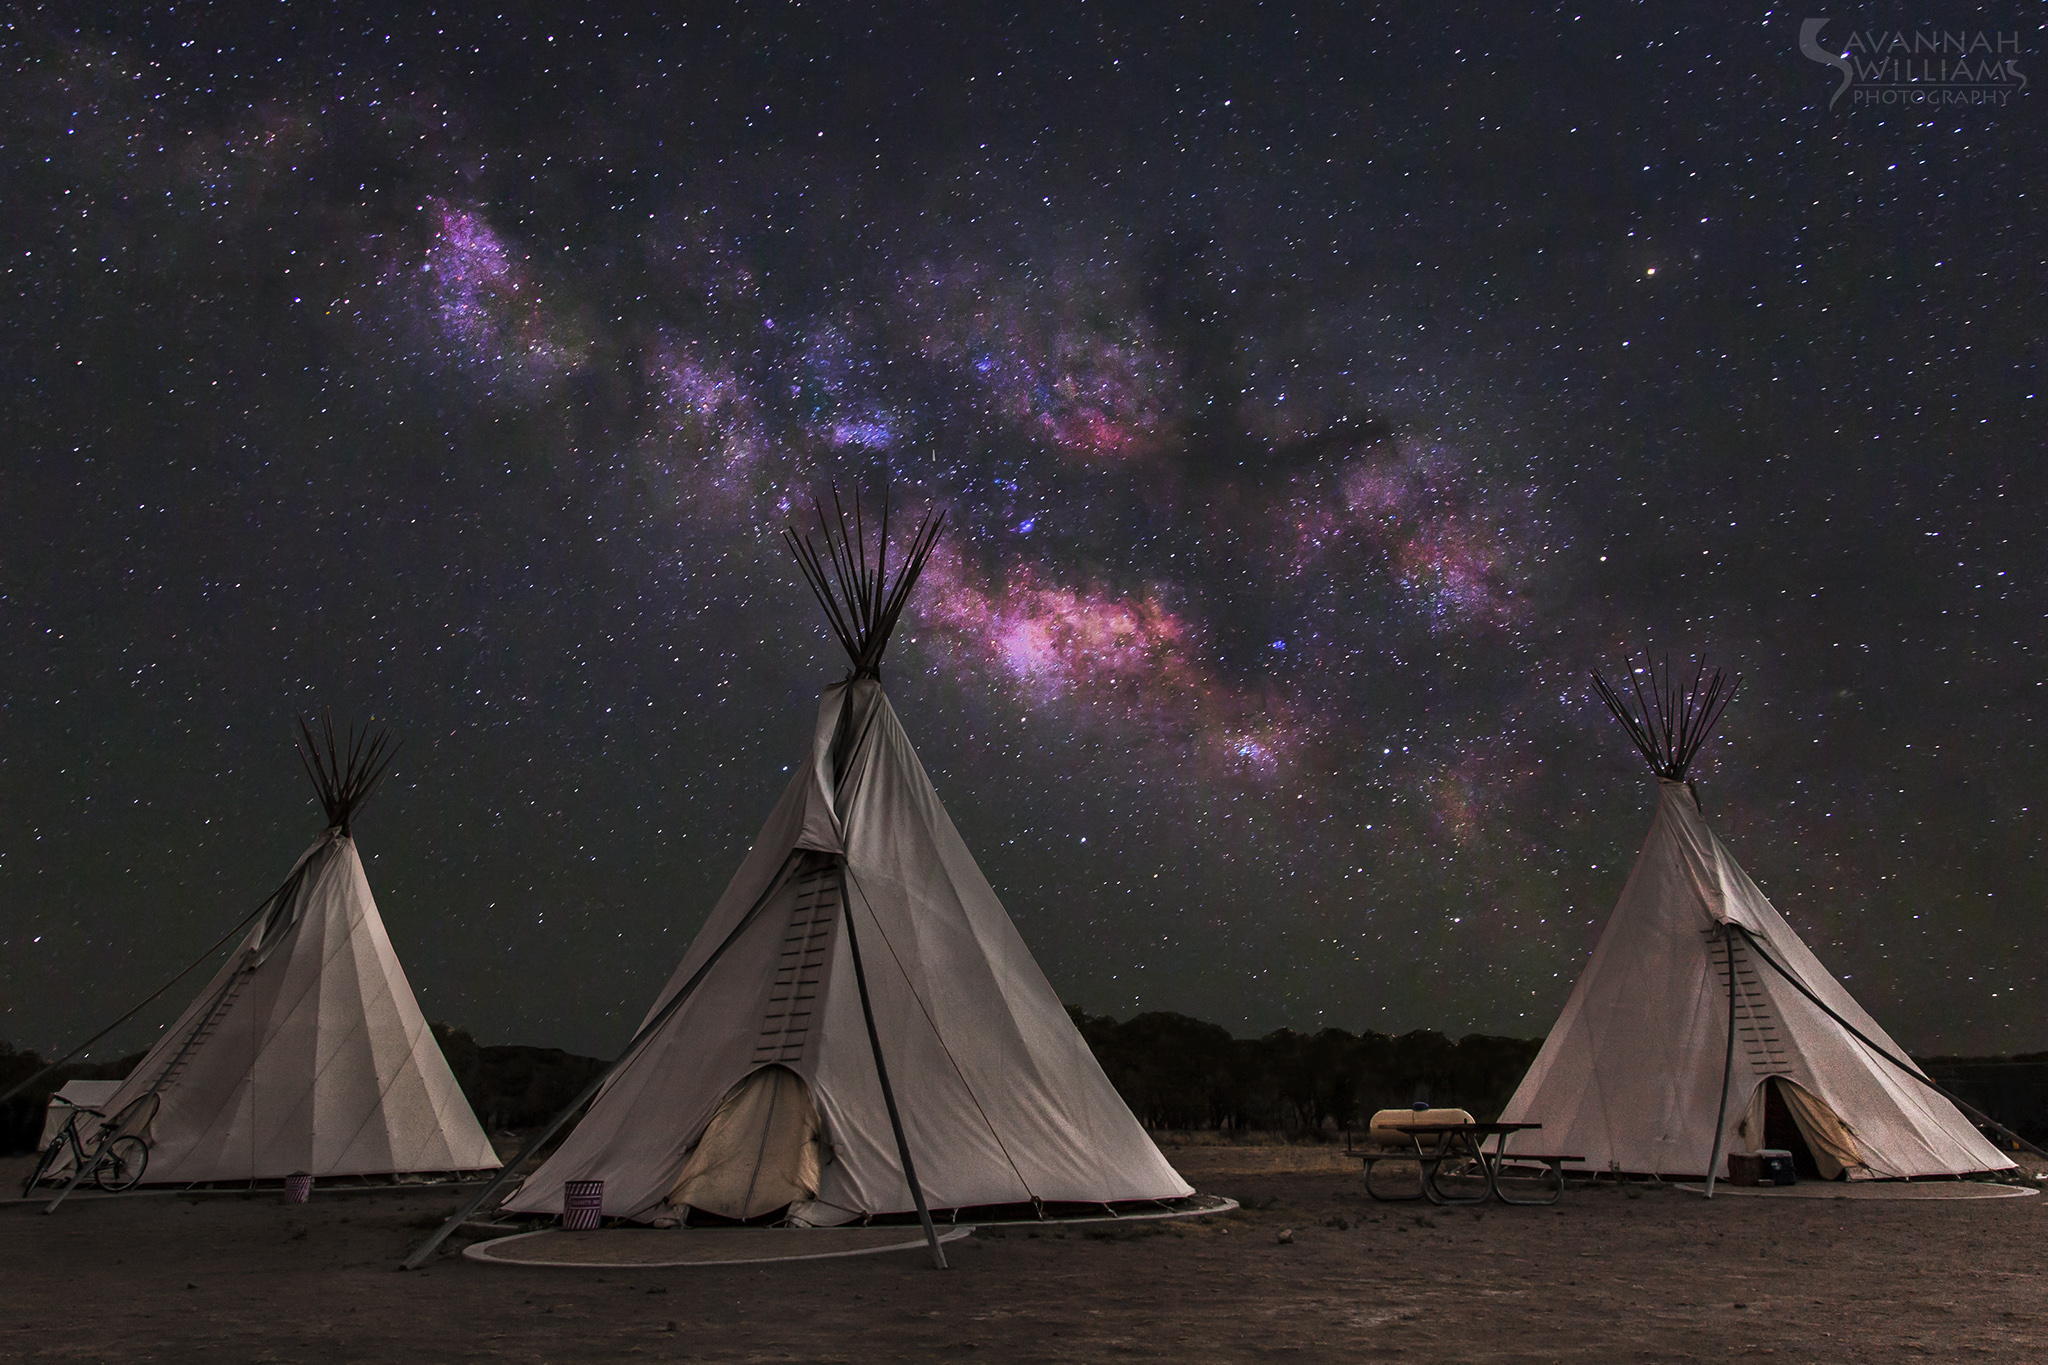 Tents Camping At A Starry Night In The Desert